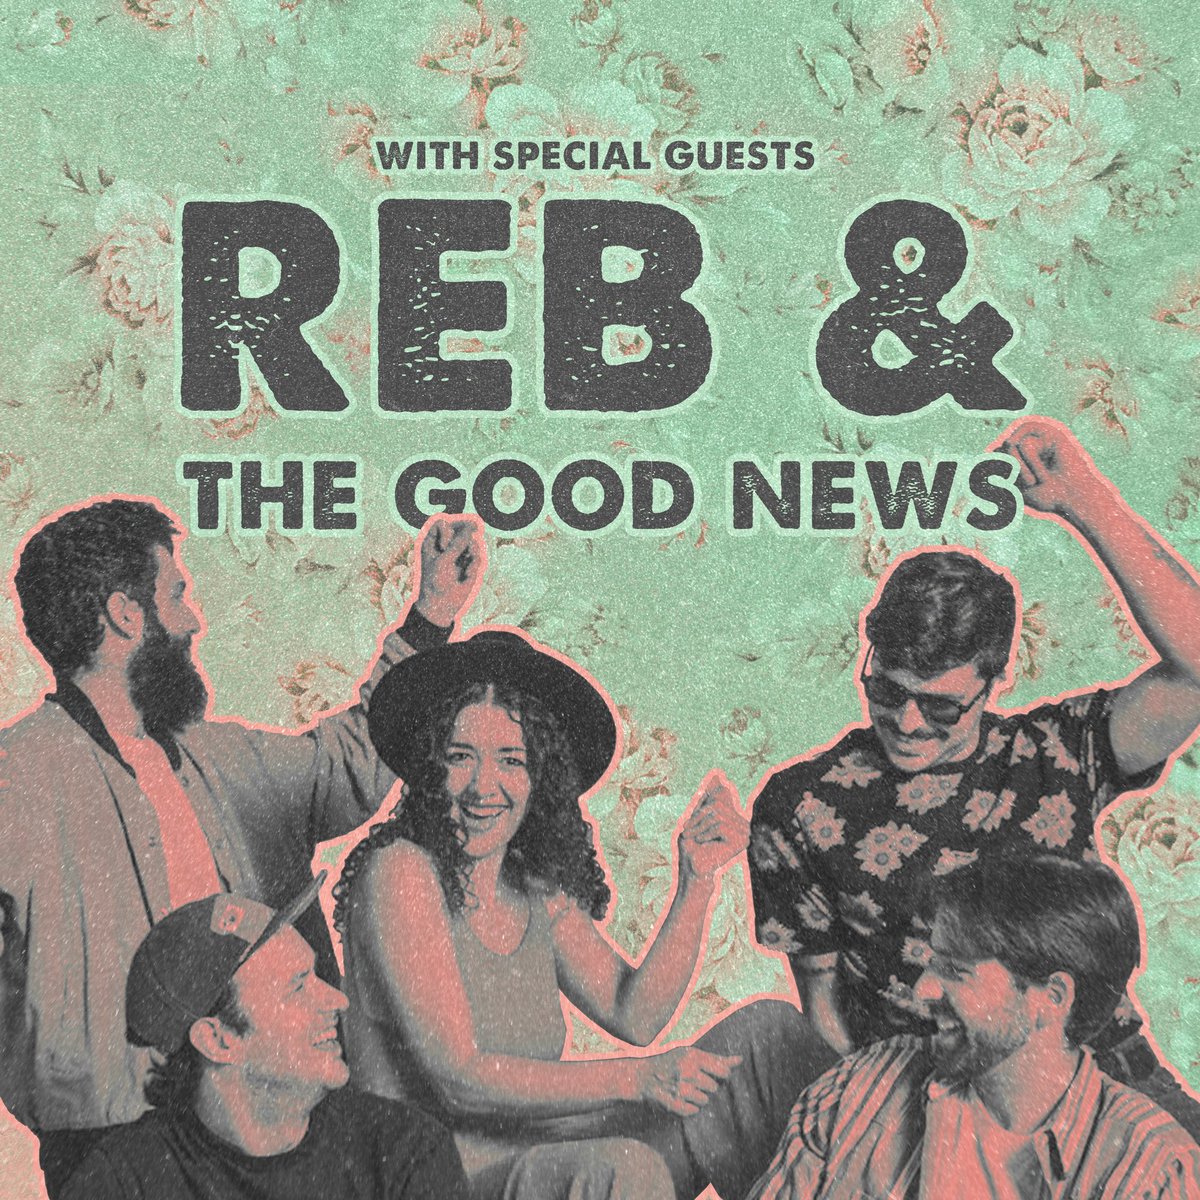 We're loving this design work Jax Cruz did for the 'Long Time Honey' release show with Reb & The Good News at Polaris Hall on May 18th 🎟️ 🎟 bit.ly/3P0U4Gx Tickets On Sale Now!